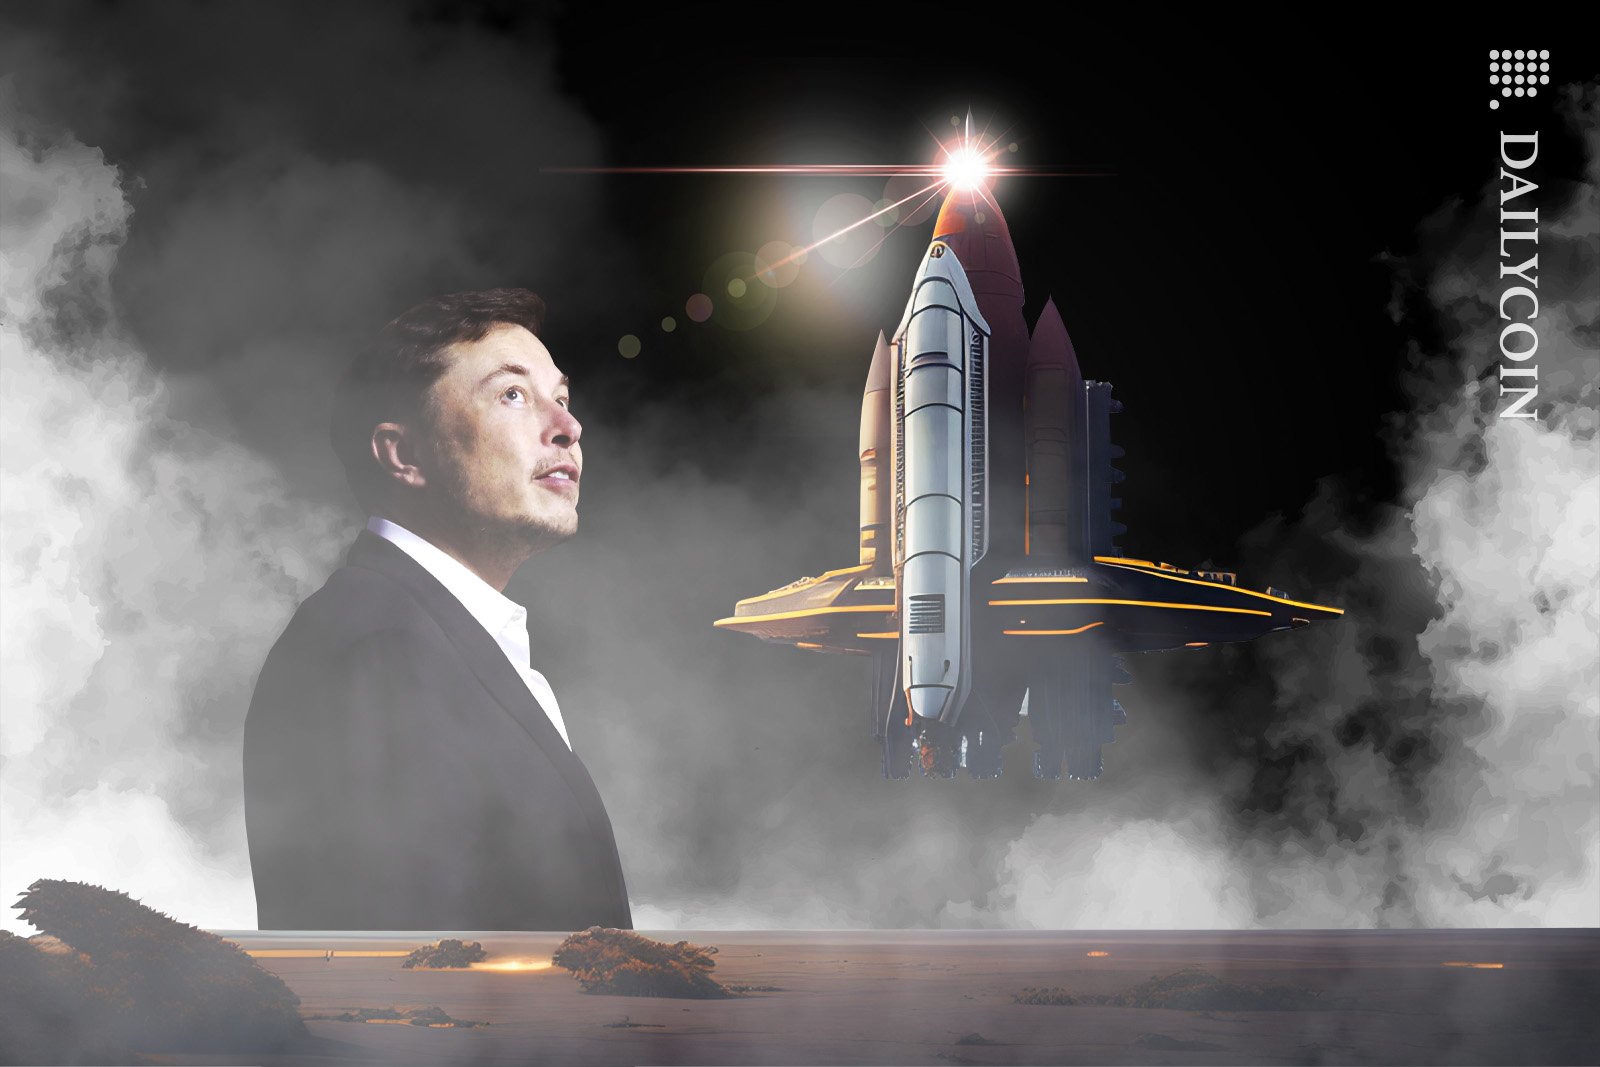 Elon Musk is looking at the Starship rocket, ready to spark up for Doge Day on 4:20.